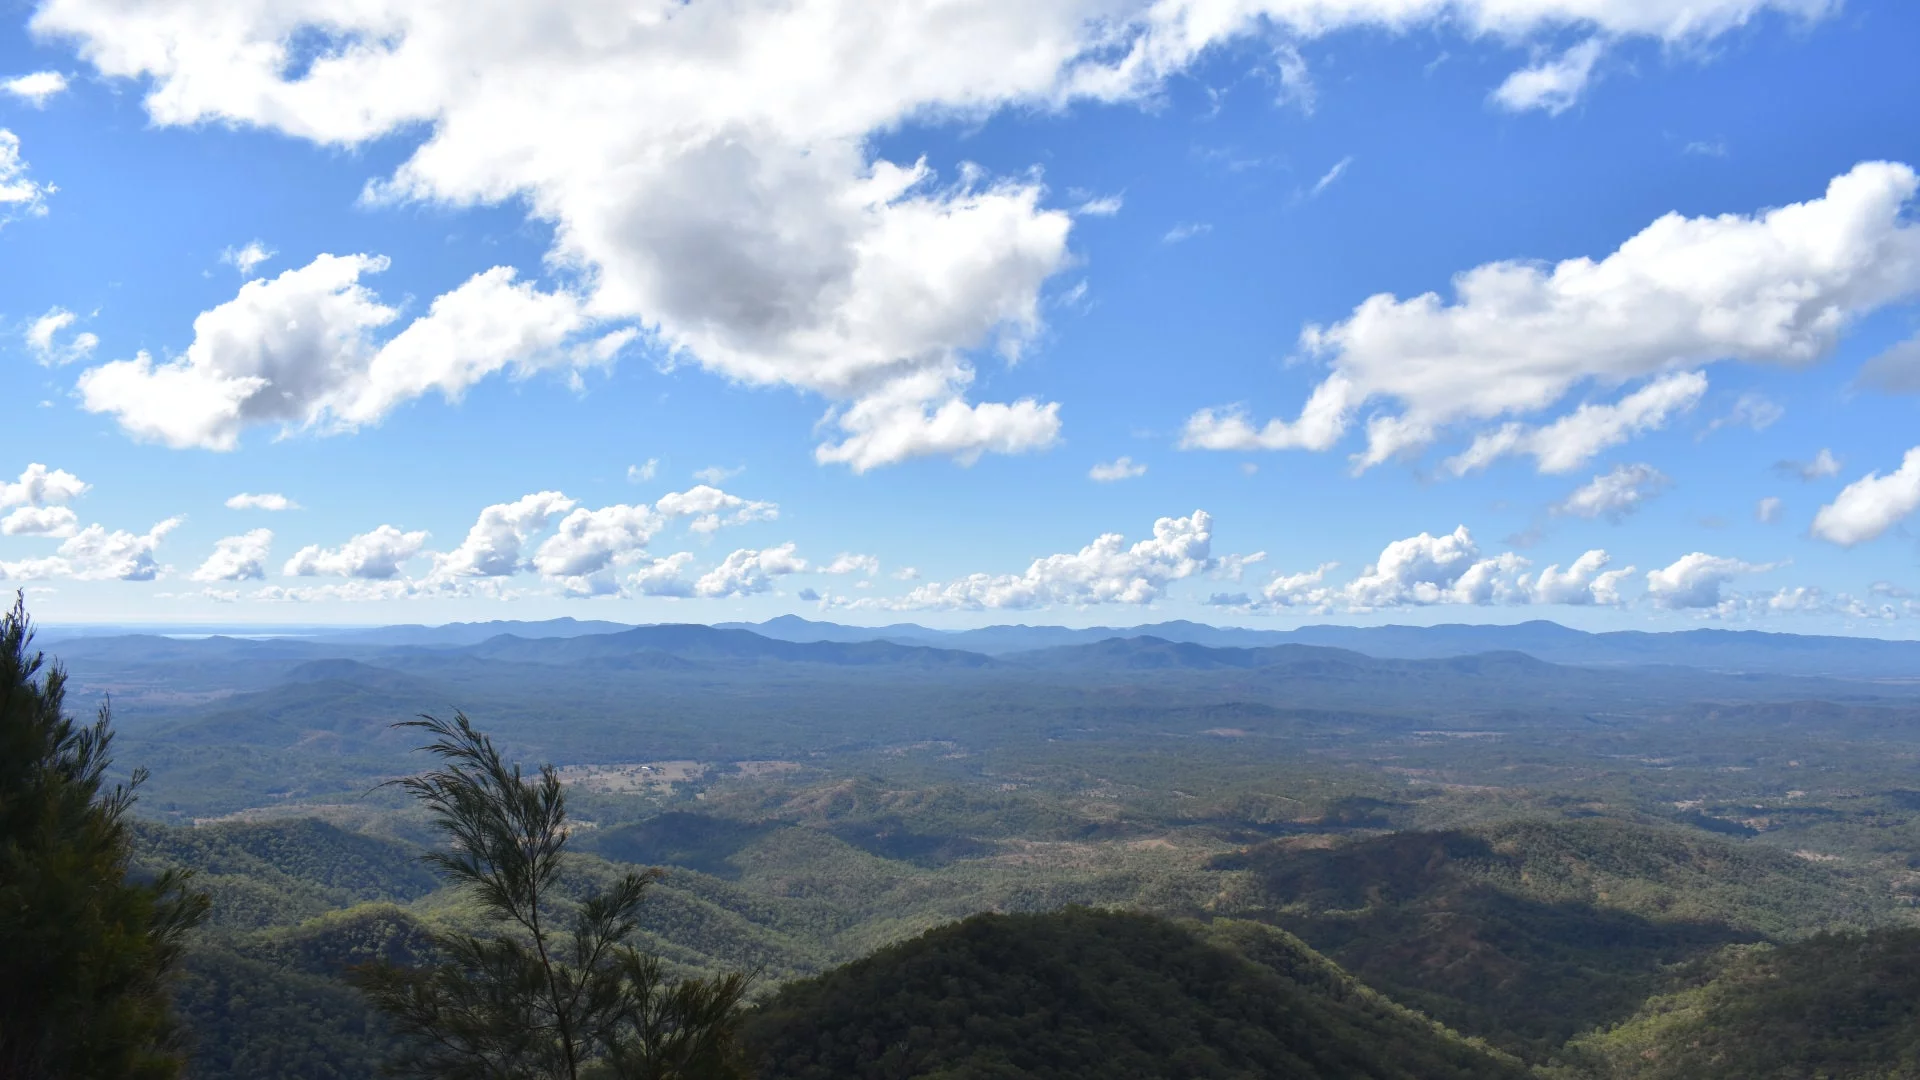 View from The Lookout at Kroombit Tops looking over the Boyne Valley. Kroombit Tops National Park north of Cania Gorge